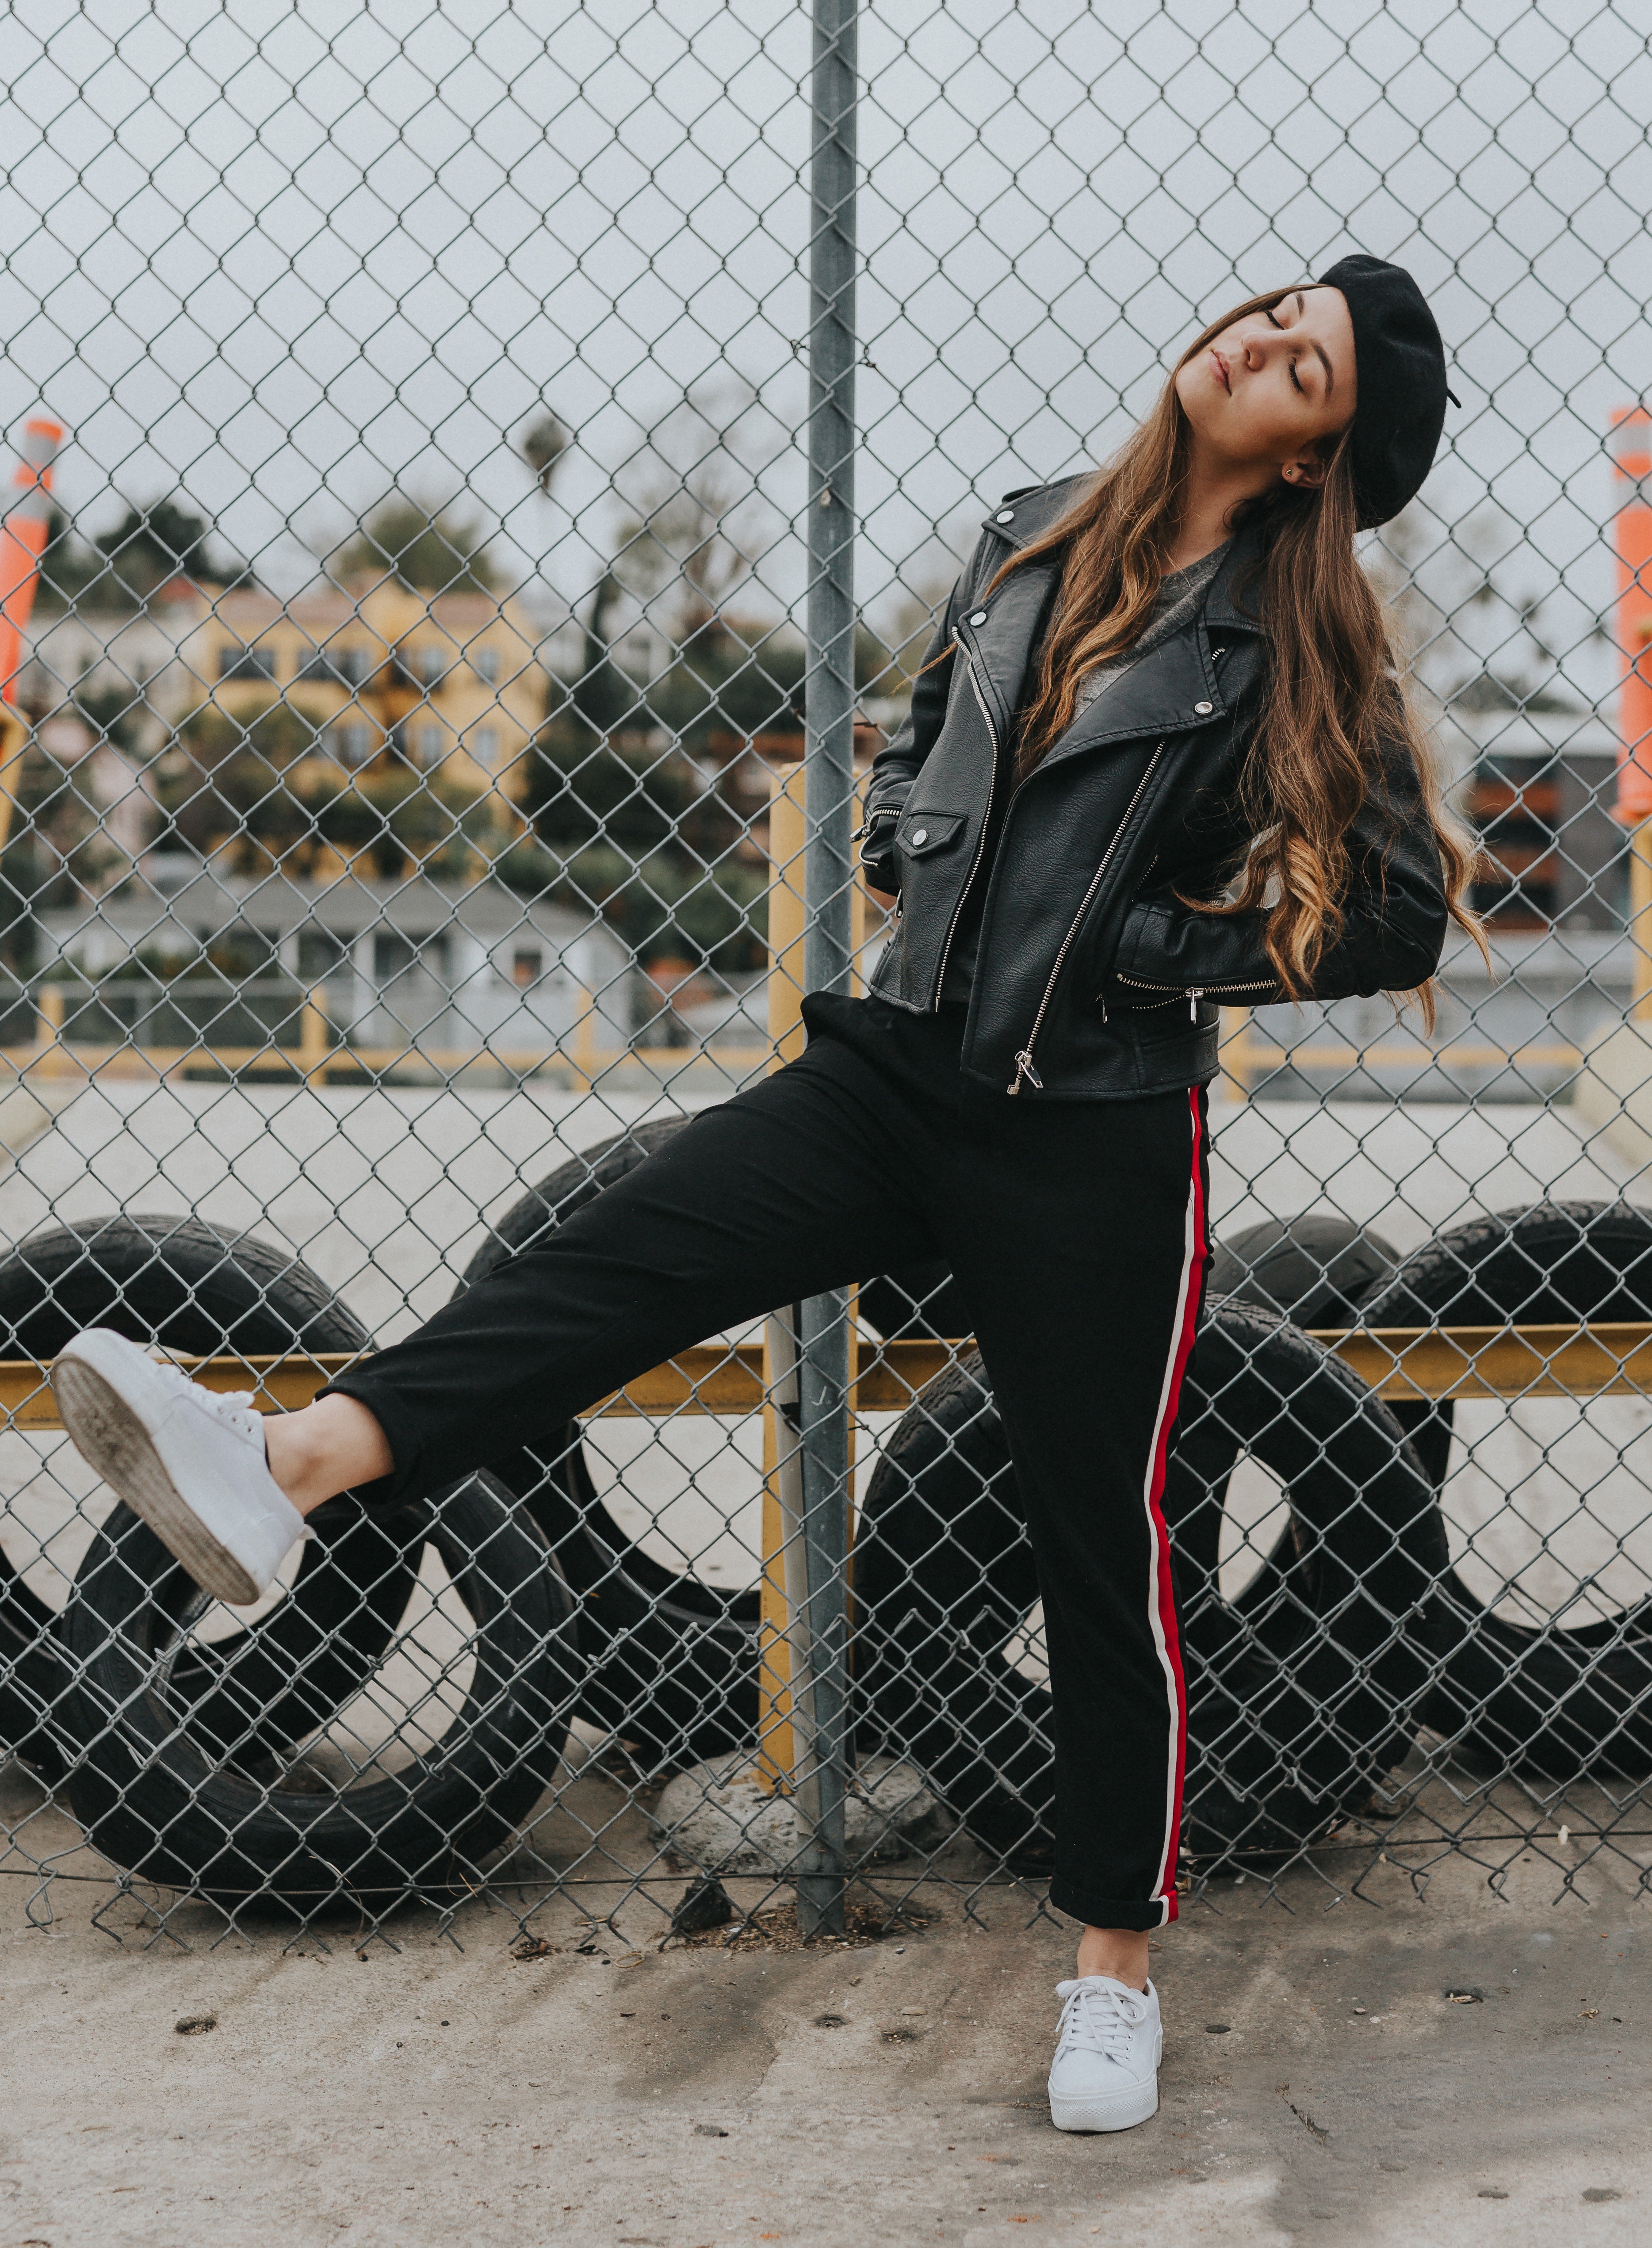 Joggers Vs. Leggings: Which Is Better For You?